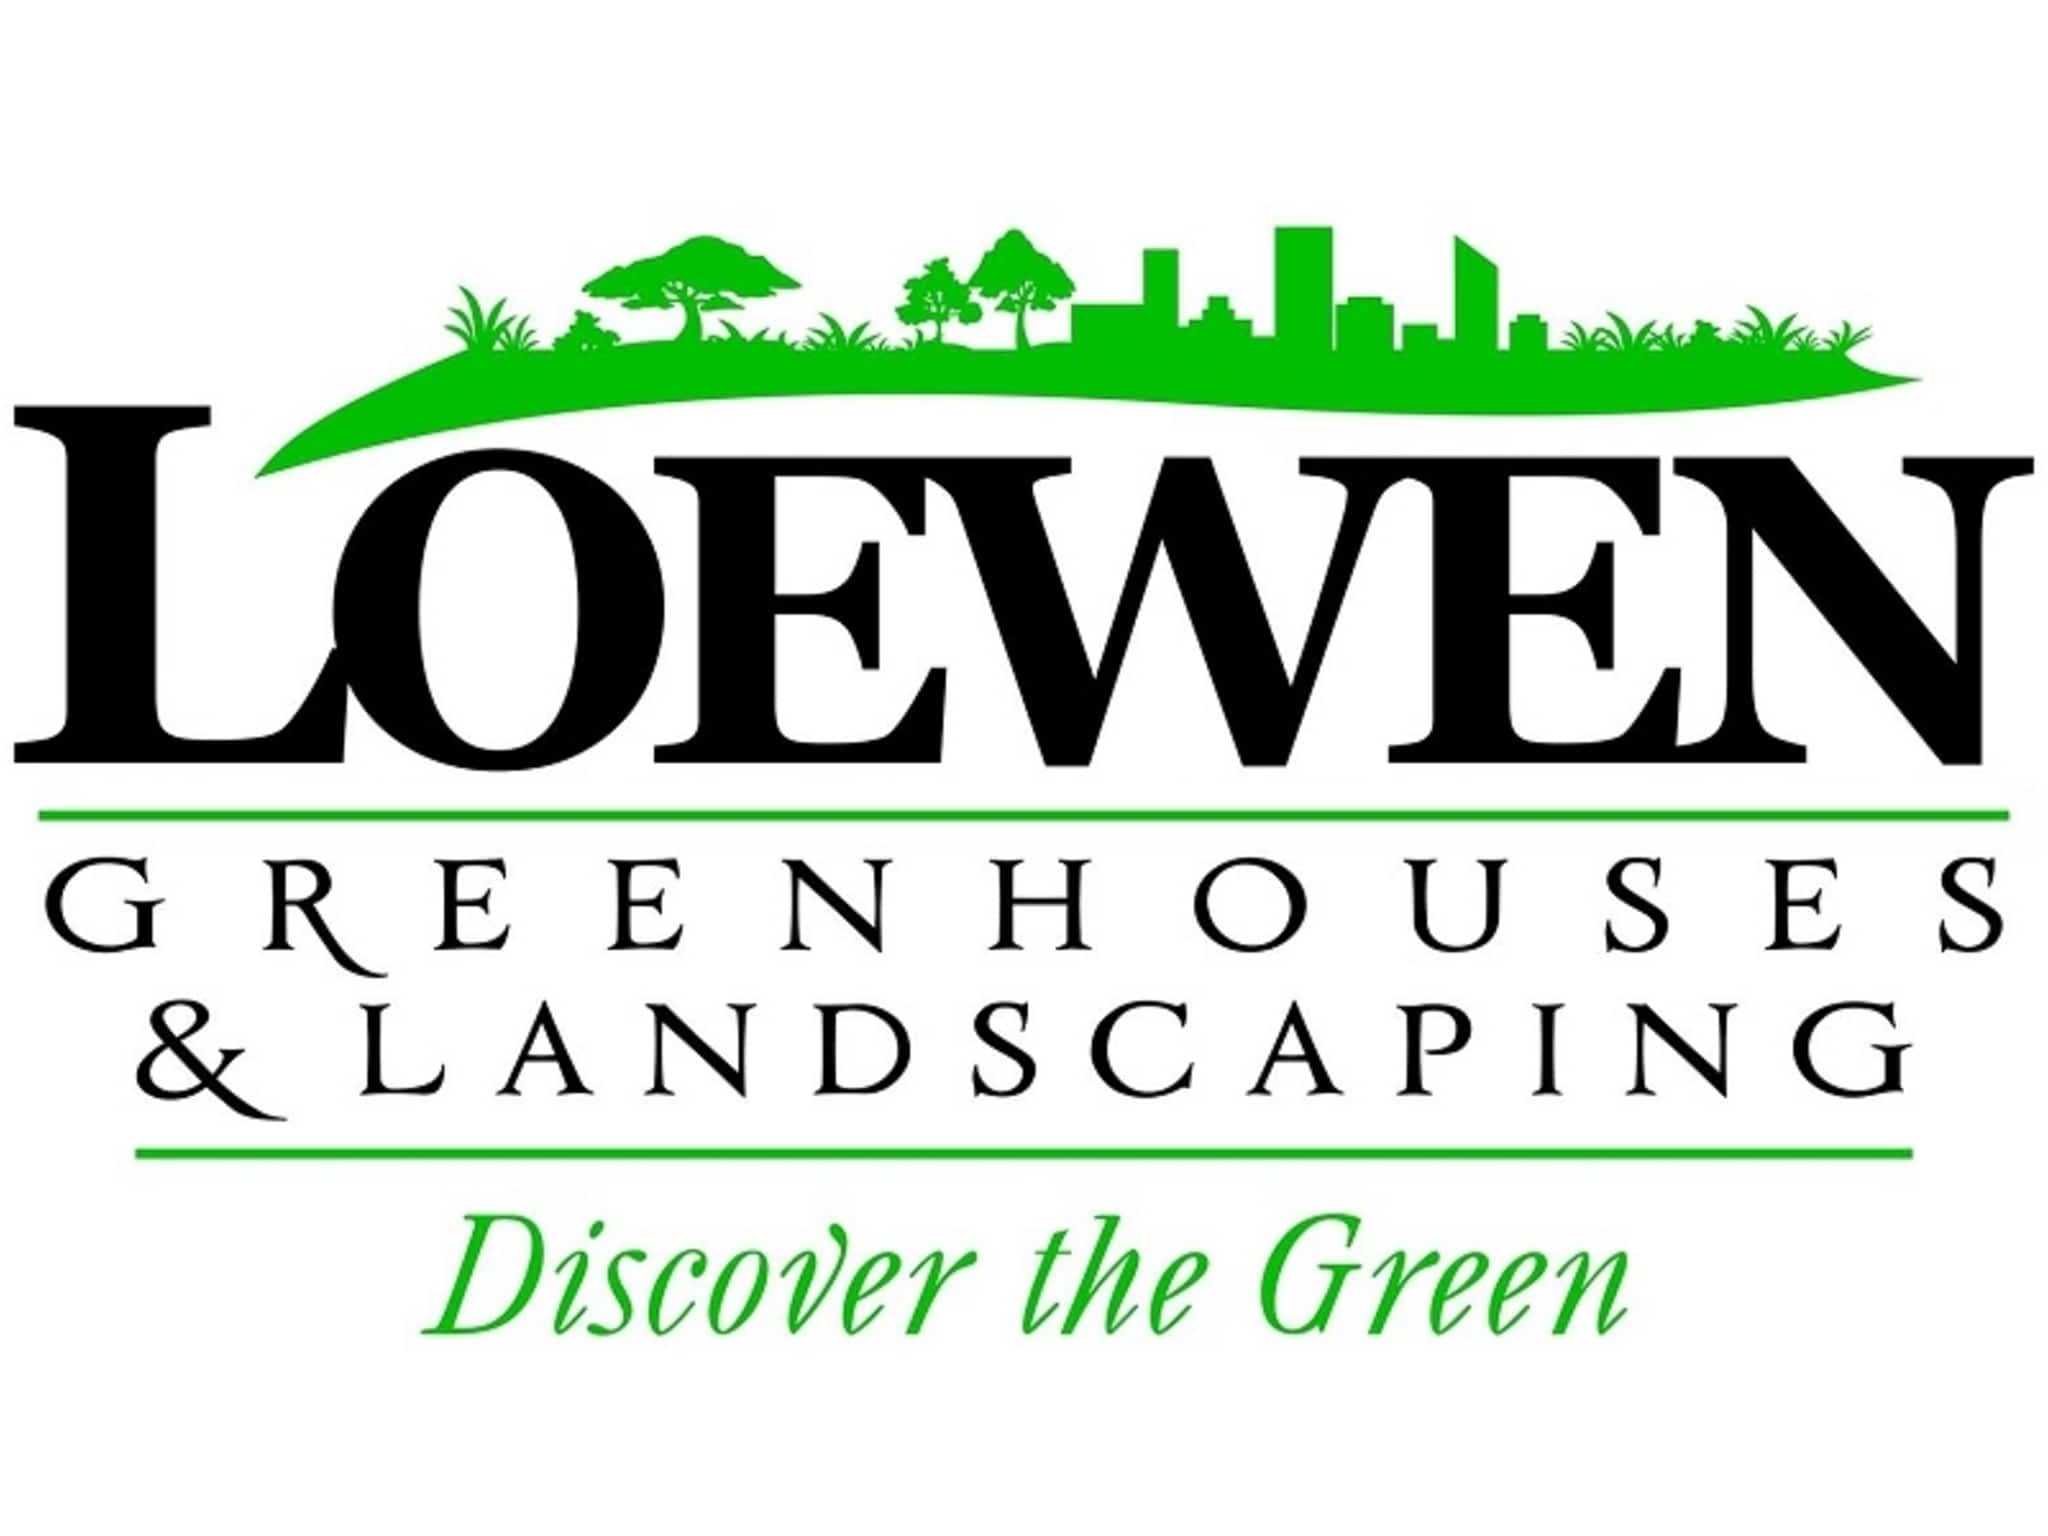 photo Loewens Greenhouse & Landscaping